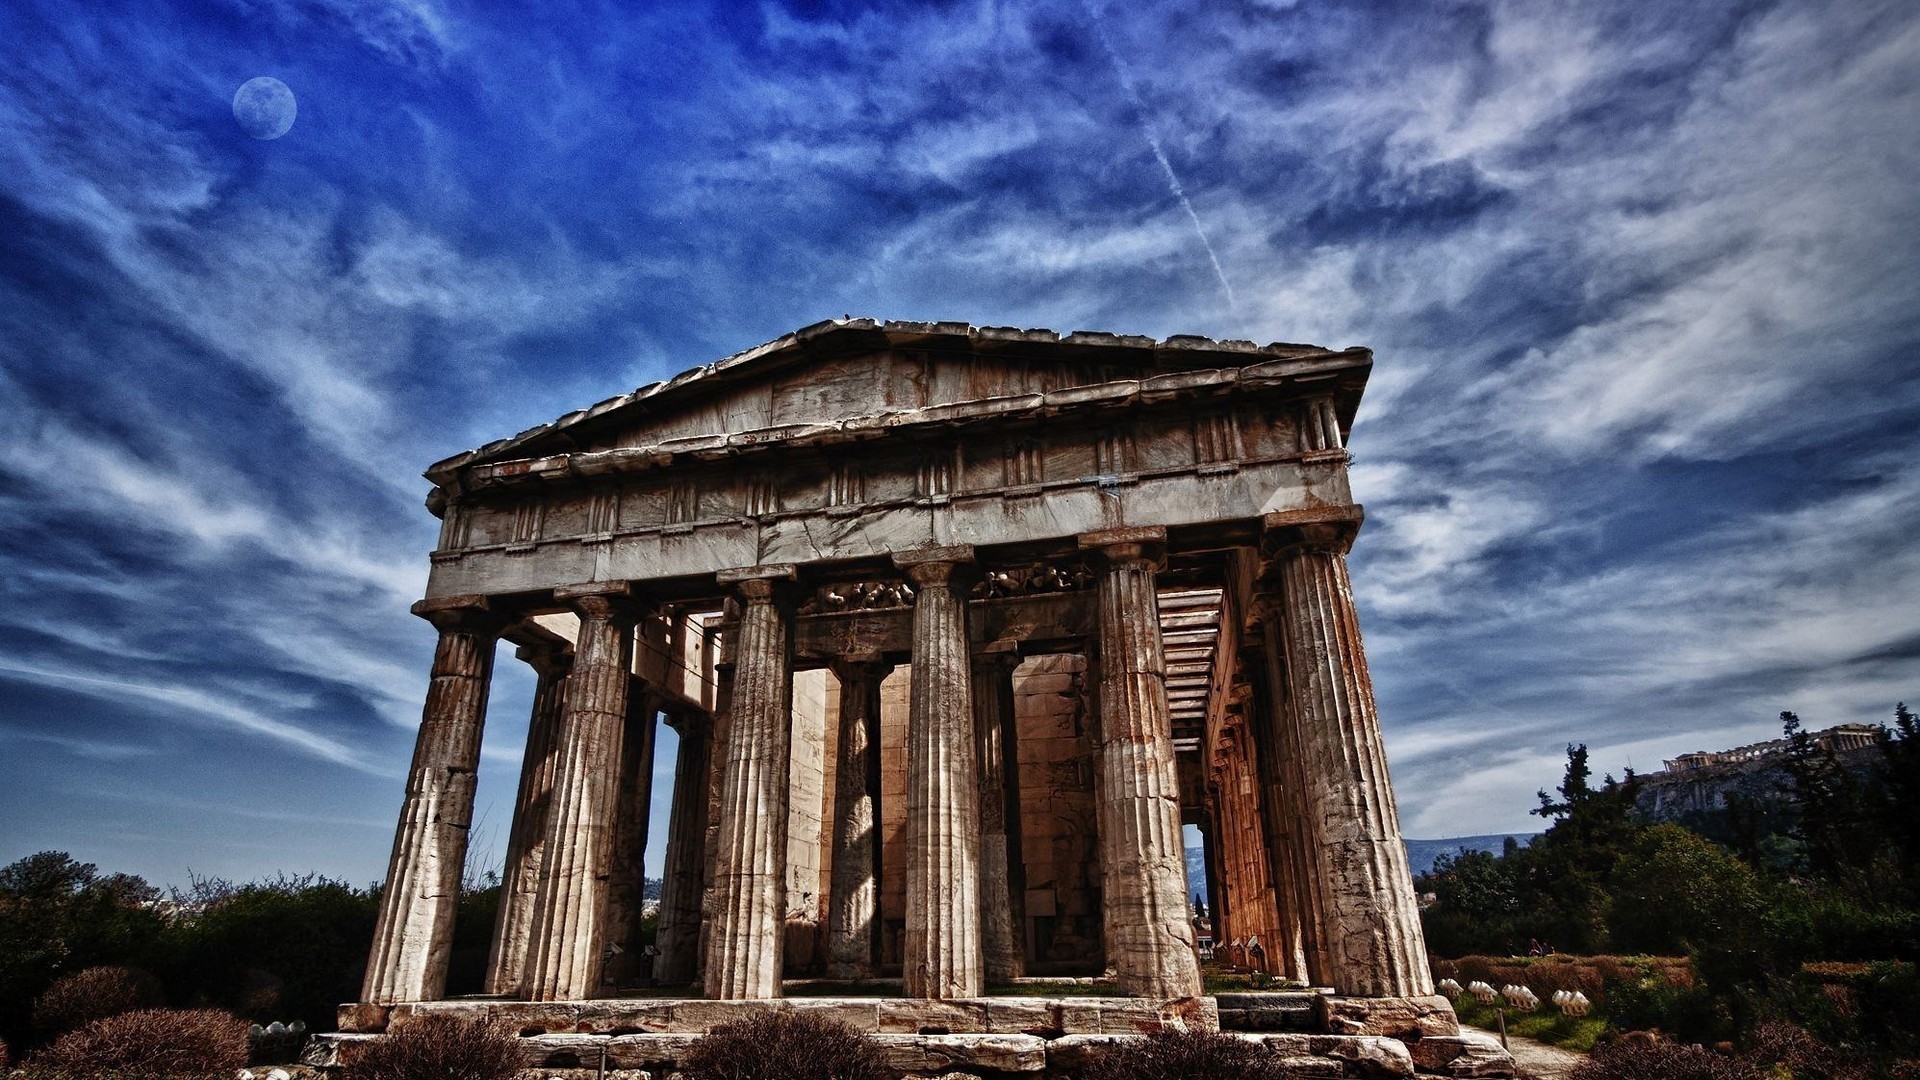 General 1920x1080 HDR building Greece sky Moon monuments outdoors ancient ruins landmark Europe